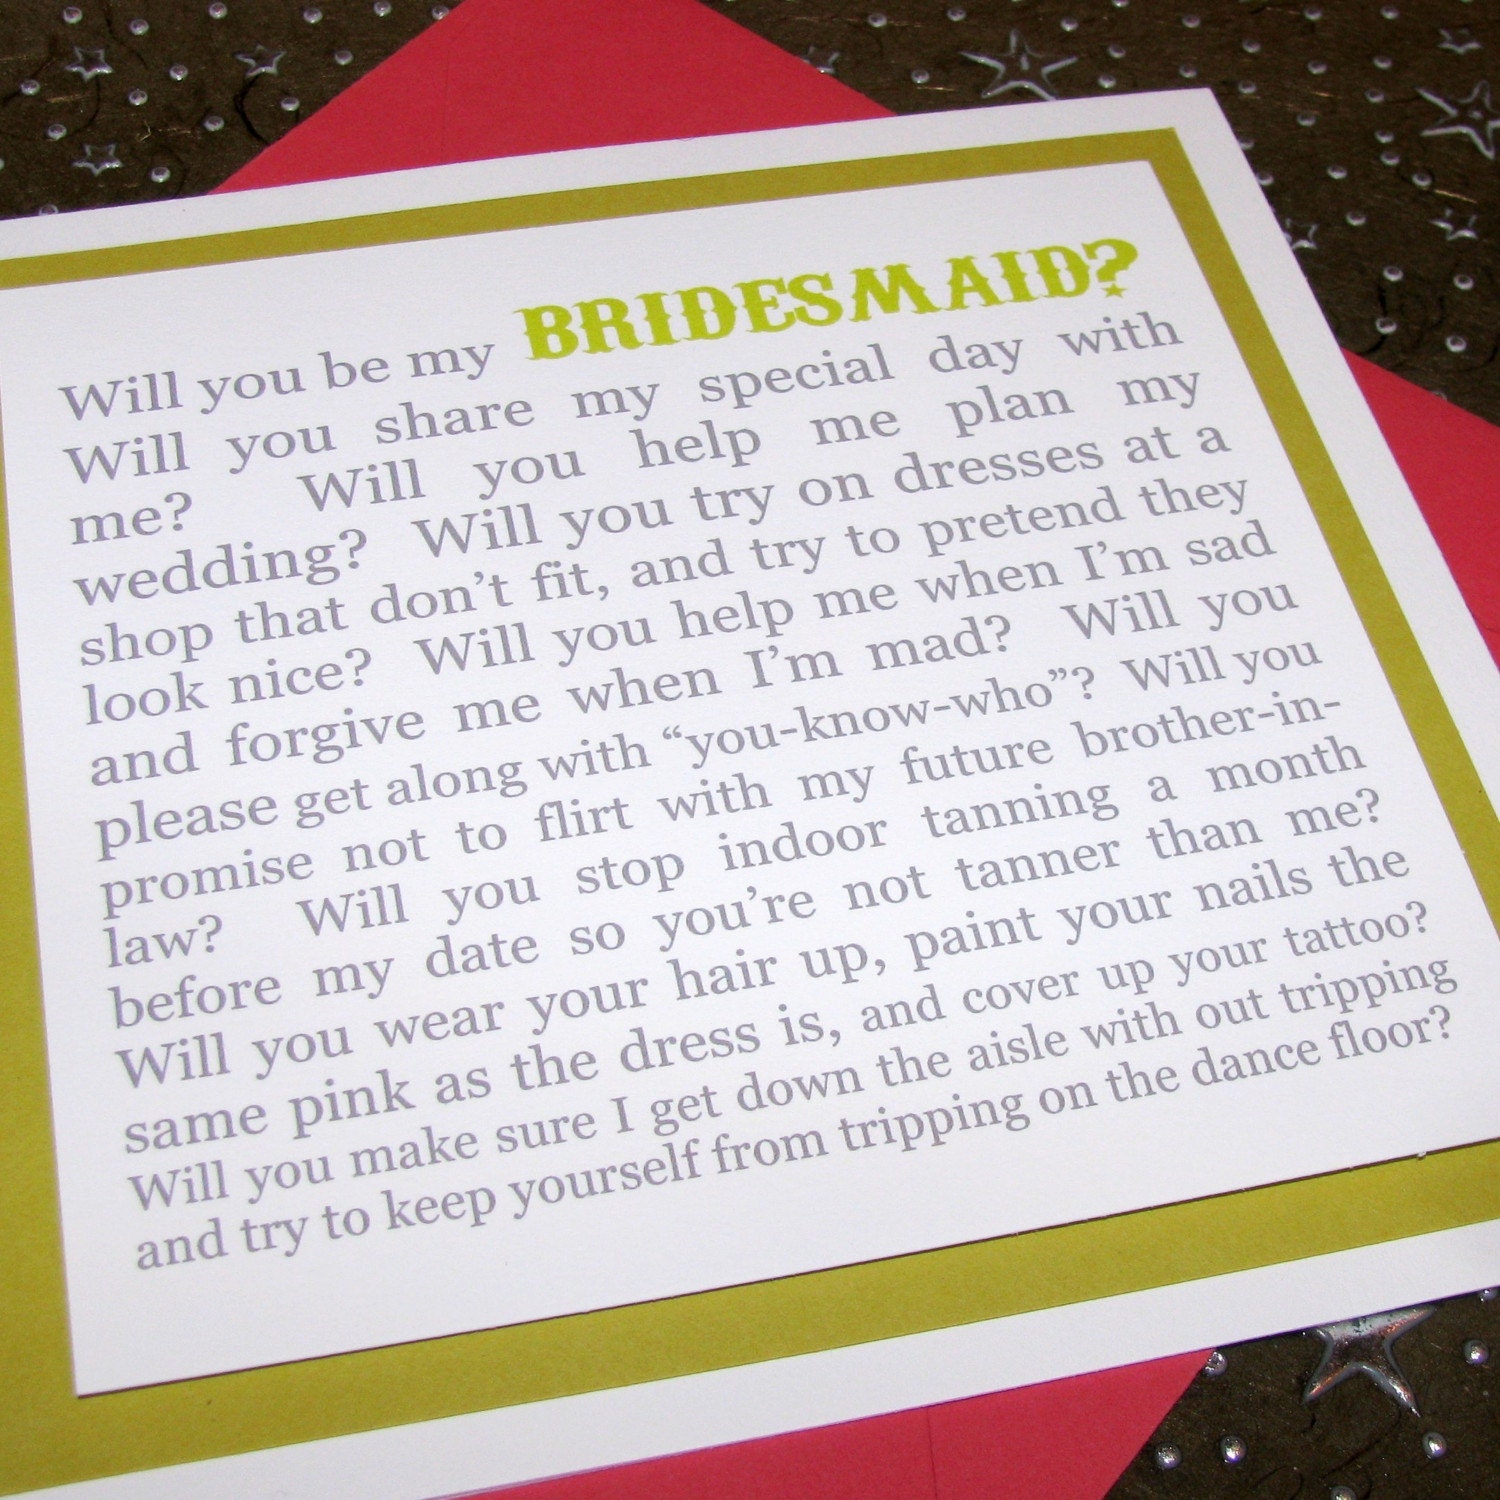 WILL YOU BE MY BRIDESMAID card